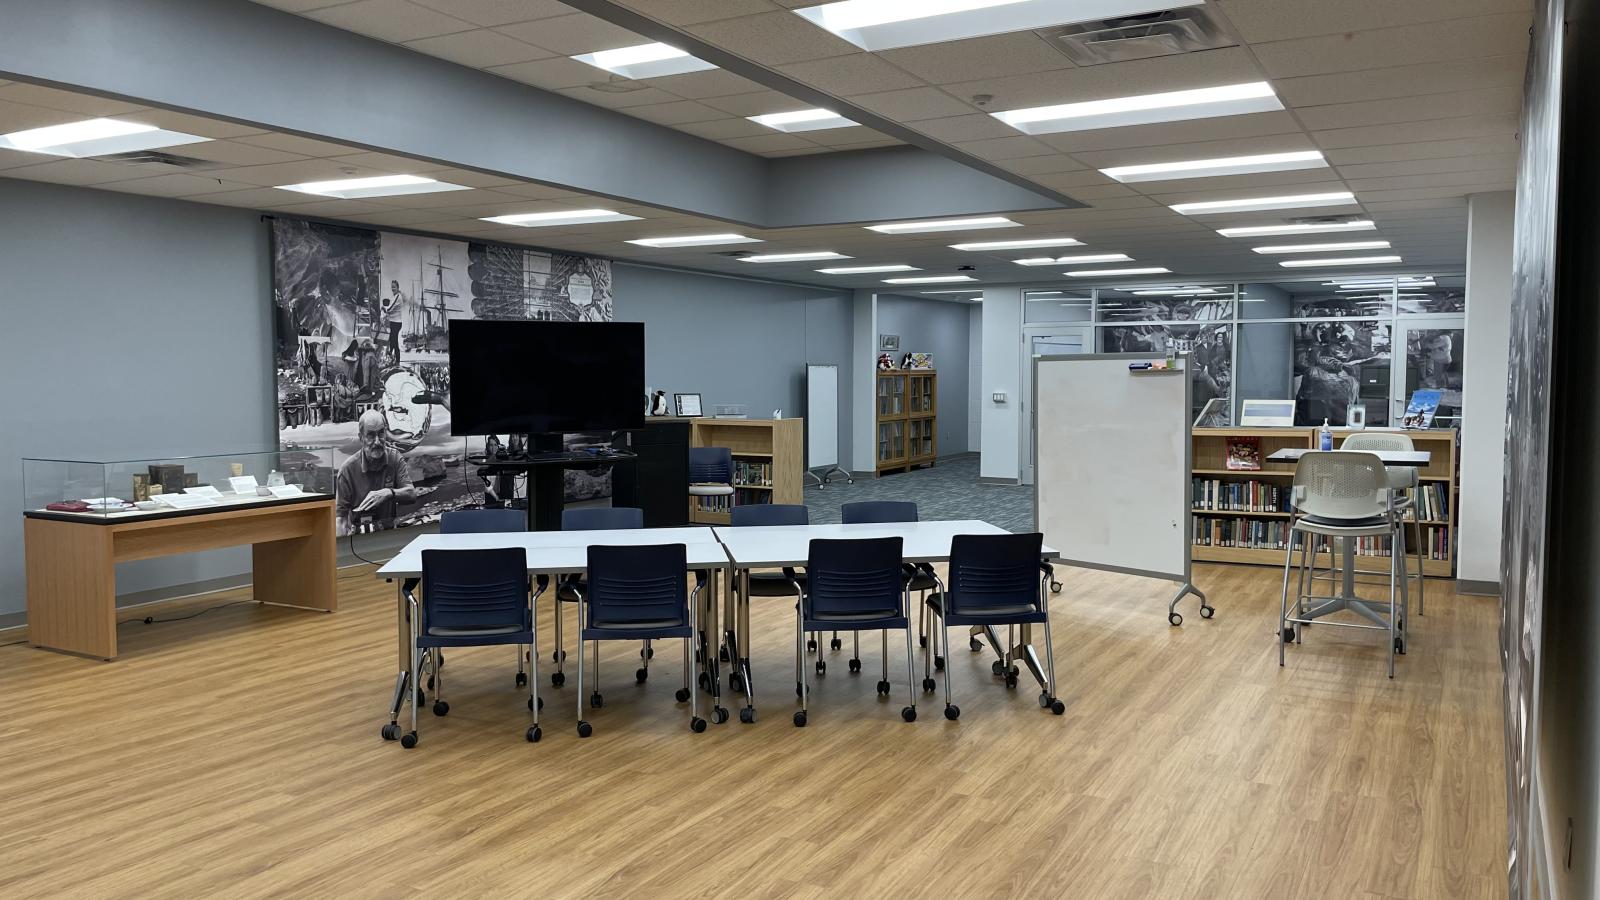 image taken from inside the Goldthwait Polar Library with white table and rolling chairs around it in the middle of the room with blue walls and a vinyl wall length drape image and a large monitor on rolling wheels and a display case next to it on light wooden base with light wood floors and light book shelve and white portable dry erase board in center behind table and white tile drop ceilings with with some squares containing florescent light fixtures that are on